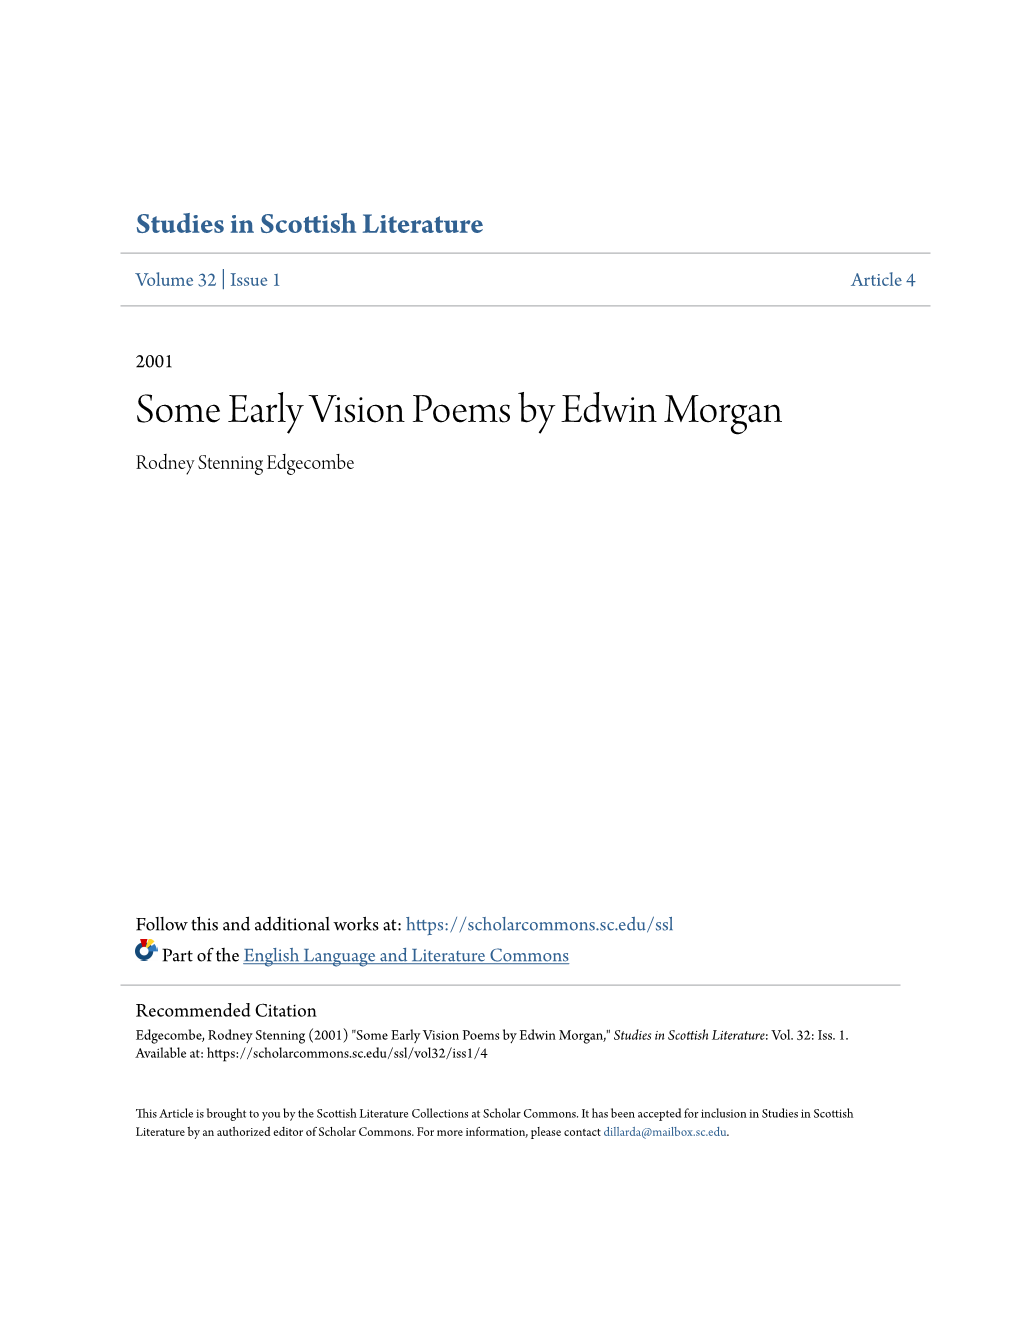 Some Early Vision Poems by Edwin Morgan Rodney Stenning Edgecombe